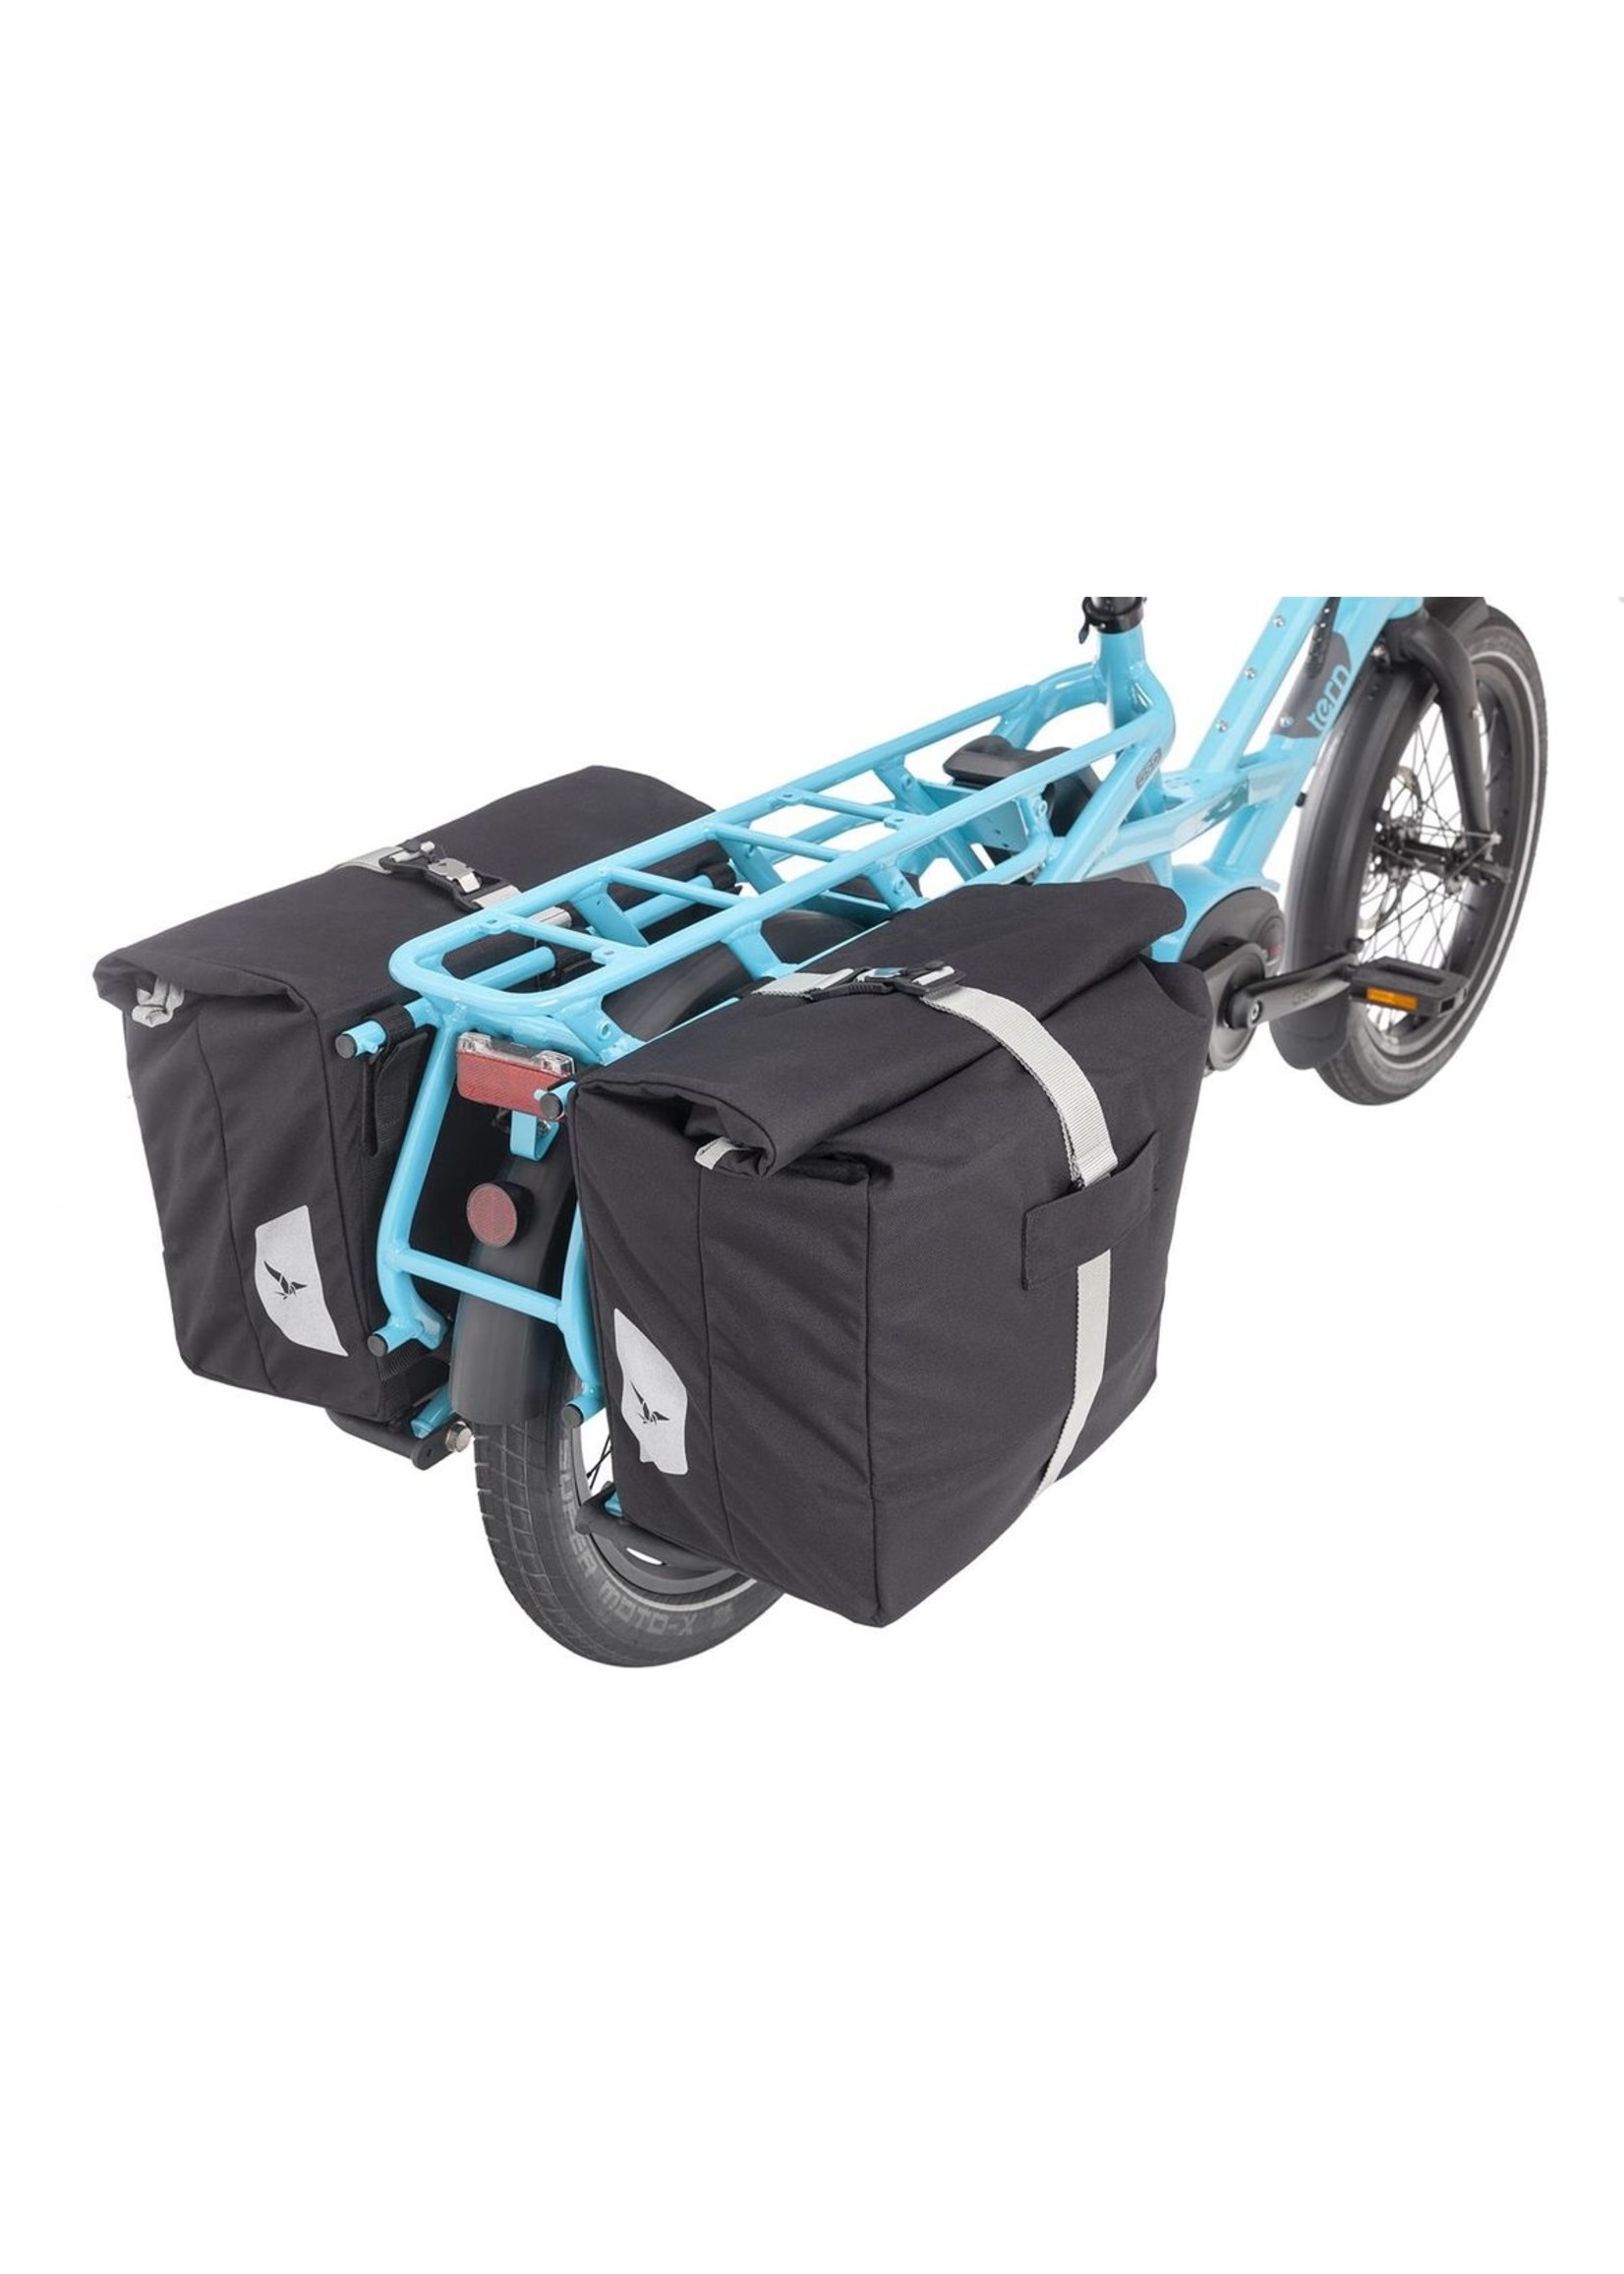 Tern eBikes Tern HSD & GSD Accessory Cargo Hold 37 Panniers Water Resistant 74L / 38kg per pair